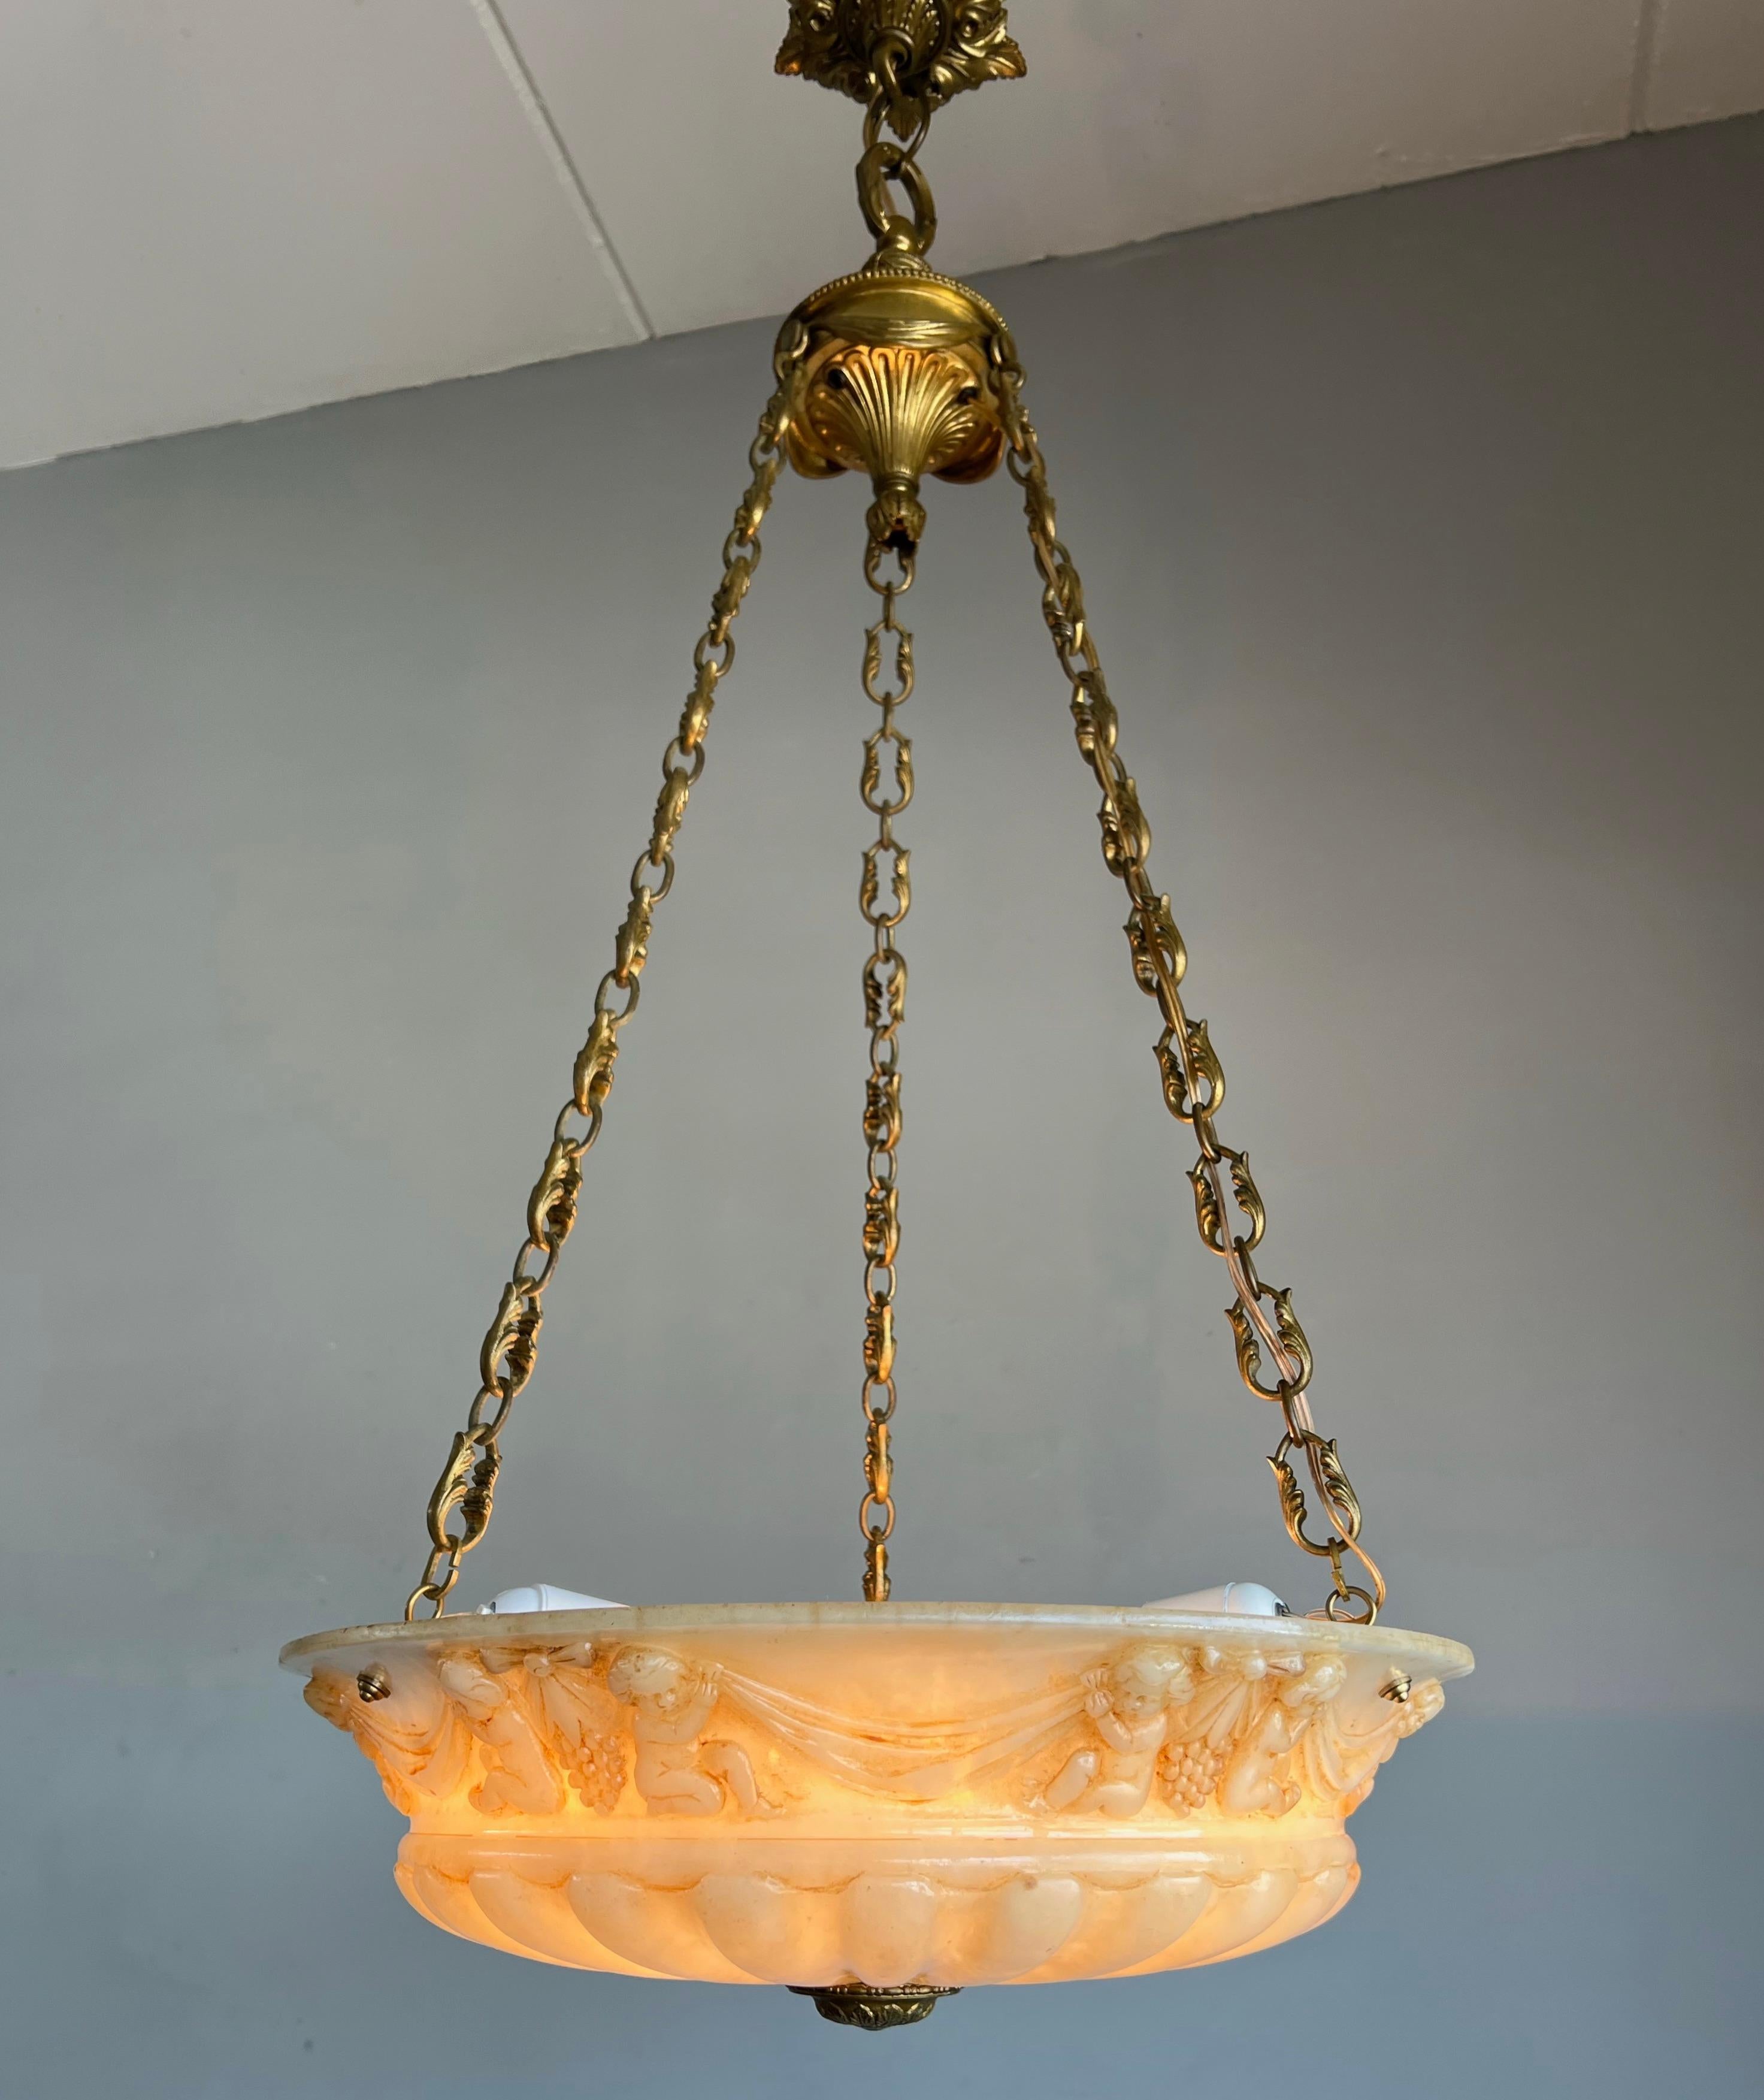 Neoclassical Revival Antique Alabaster Pendant Light with Impressive Hand Carved Putti Decor For Sale